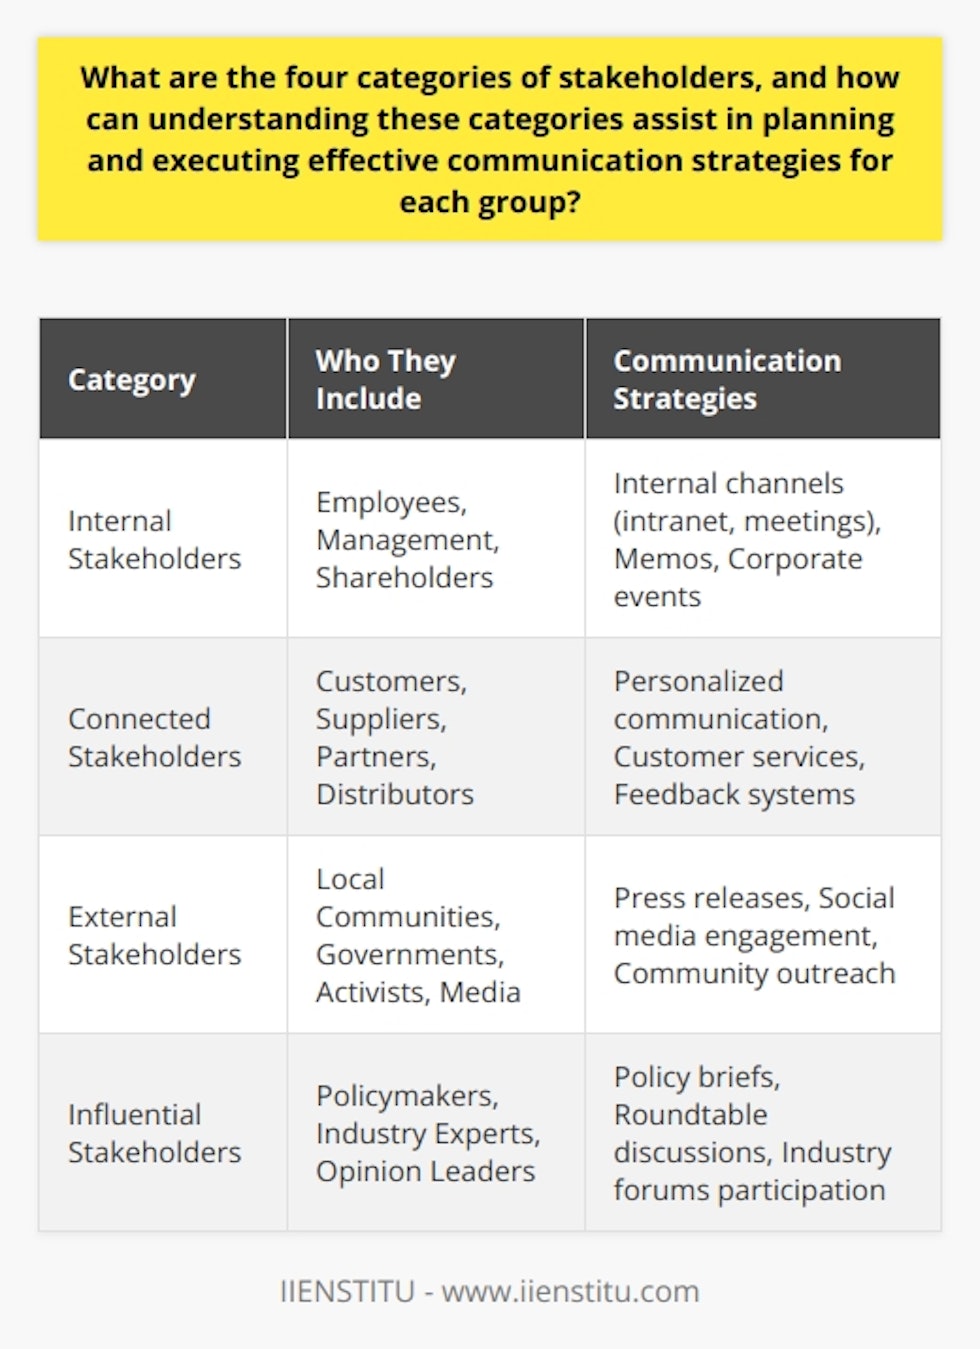 Understanding the different categories of stakeholders is critical for any organization aiming to maintain a positive relationship with those it impacts and who impact it. These categories are: internal, connected, external, and influential.Internal Stakeholders consist of people who are part of the organization, such as employees, management, and shareholders. Communication with this group is fundamental to organizational success, as these stakeholders are directly involved in day-to-day operations. Regular, transparent communication can be achieved through internal channels like company intranet, meetings, memos, and corporate events. These channels can help to align the internal stakeholders' goals with the organization's objectives and foster a collaborative working environment.Connected Stakeholders are directly involved in the transactional aspect of an organization's business. This group includes customers, suppliers, partners, and distributors. Understanding the needs and expectations of connected stakeholders can be crucial, as their satisfaction can dictate an organization's success. Tailoring communication strategies to this group often involves personalized communications, customer service excellence, and engaging through feedback systems. Recognizing their specific needs and addressing them directly can strengthen relationships and support sustained business growth.External Stakeholders, such as local communities, governments, activists, and the media, may not have a direct link to the organization but their influence can be significant. An organization may not always have control over the narrative when it comes to external stakeholders, making proactive and reactive public relations strategies essential. Communicating with this group requires transparency and accountability. Tools such as press releases, social media engagement, and community outreach programs can help to shape the public perception and navigate the relationship with external stakeholders.Influential Stakeholders are individuals or groups with the power to impact public opinion or regulatory decisions, including policymakers, industry experts, and other opinion leaders. Communication with these stakeholders must be strategic and well-informed, catering to their influence on industry trends and regulatory changes. Specific strategies might include policy briefs, roundtable discussions, and participation in industry forums to advocate for the organization's interests and to align with broader industry standards.In conclusion, identifying and understanding these categories of stakeholders is a vital step in developing differentiated communication strategies. By doing so, organizations can ensure that communications are appropriately targeted, thereby fostering a positive and productive relationship with each group, and addressing their unique concerns and perspectives. Effective communication with stakeholders not only supports operational effectiveness but also bolsters an organization's reputation and long-term success.